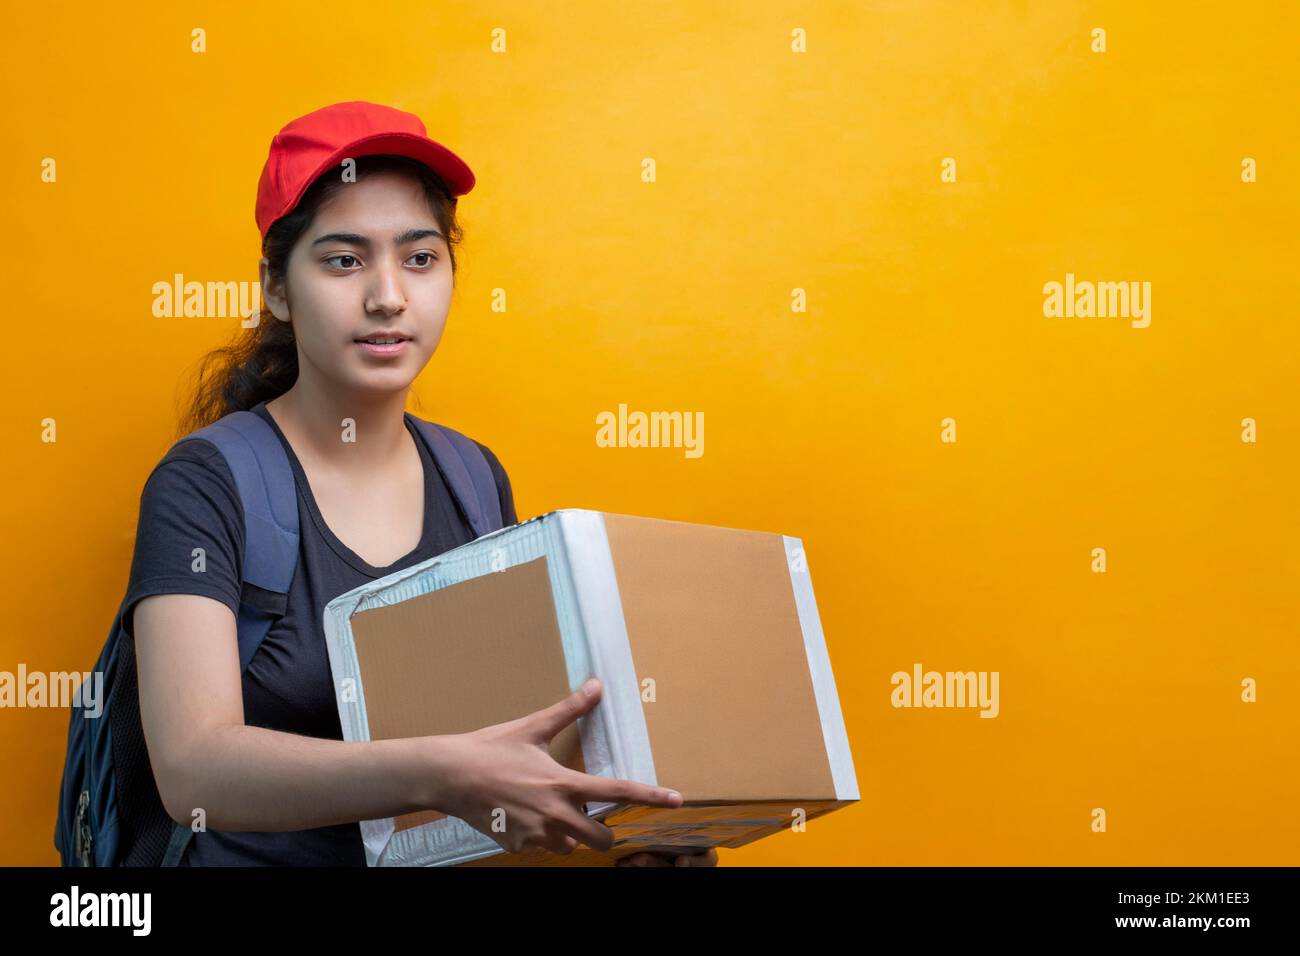 Young Delivery Woman Holding Cardboard Box Against Yellow Background Stock Photo